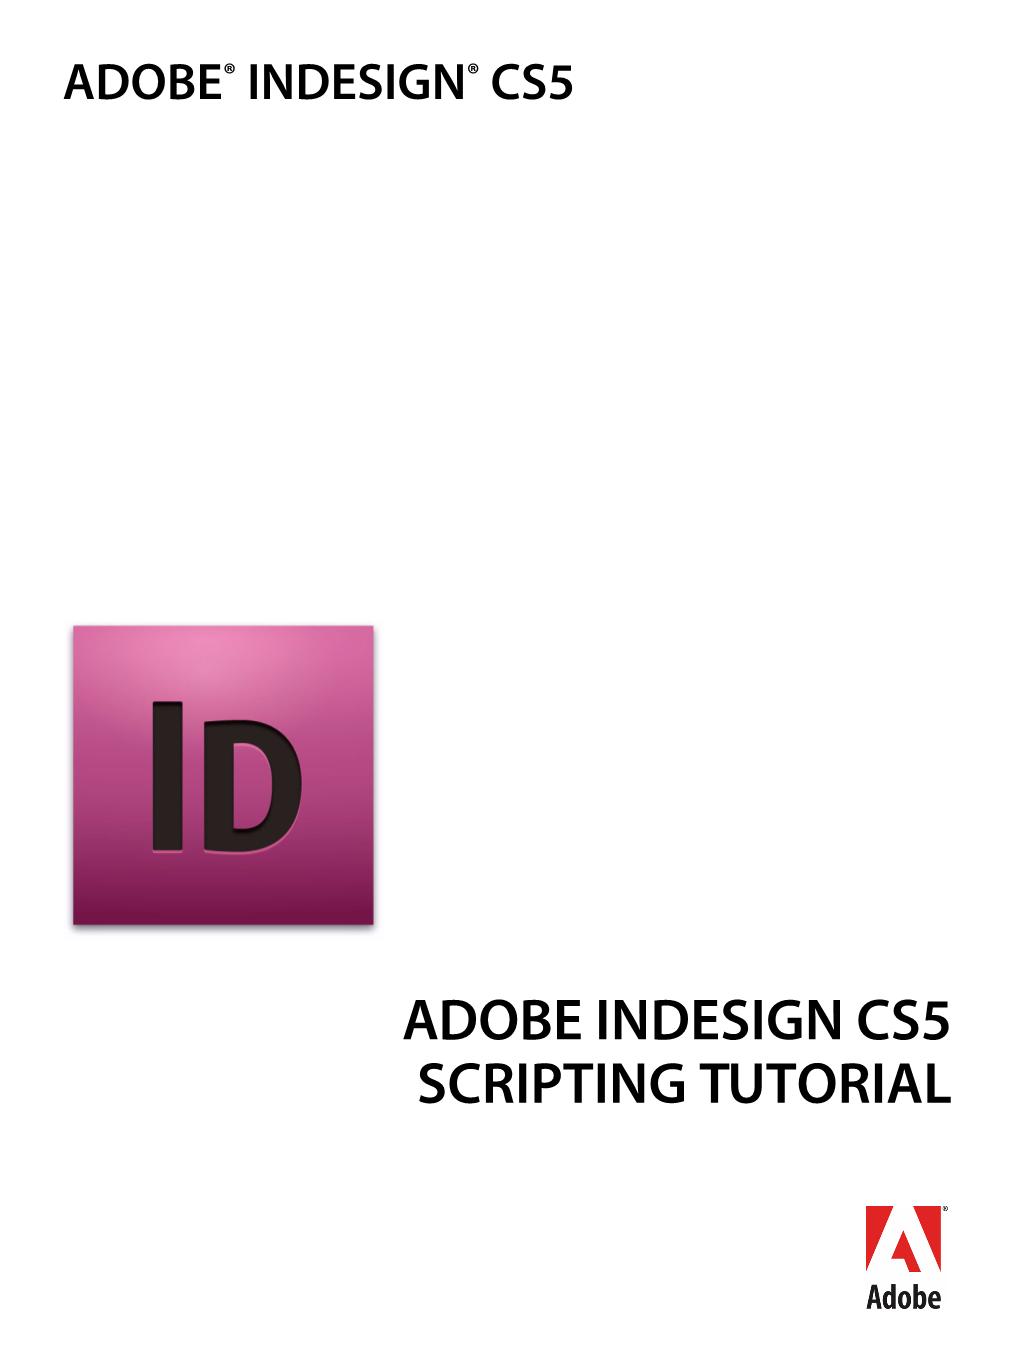 ADOBE INDESIGN CS5 SCRIPTING TUTORIAL © 2010 Adobe Systems Incorporated